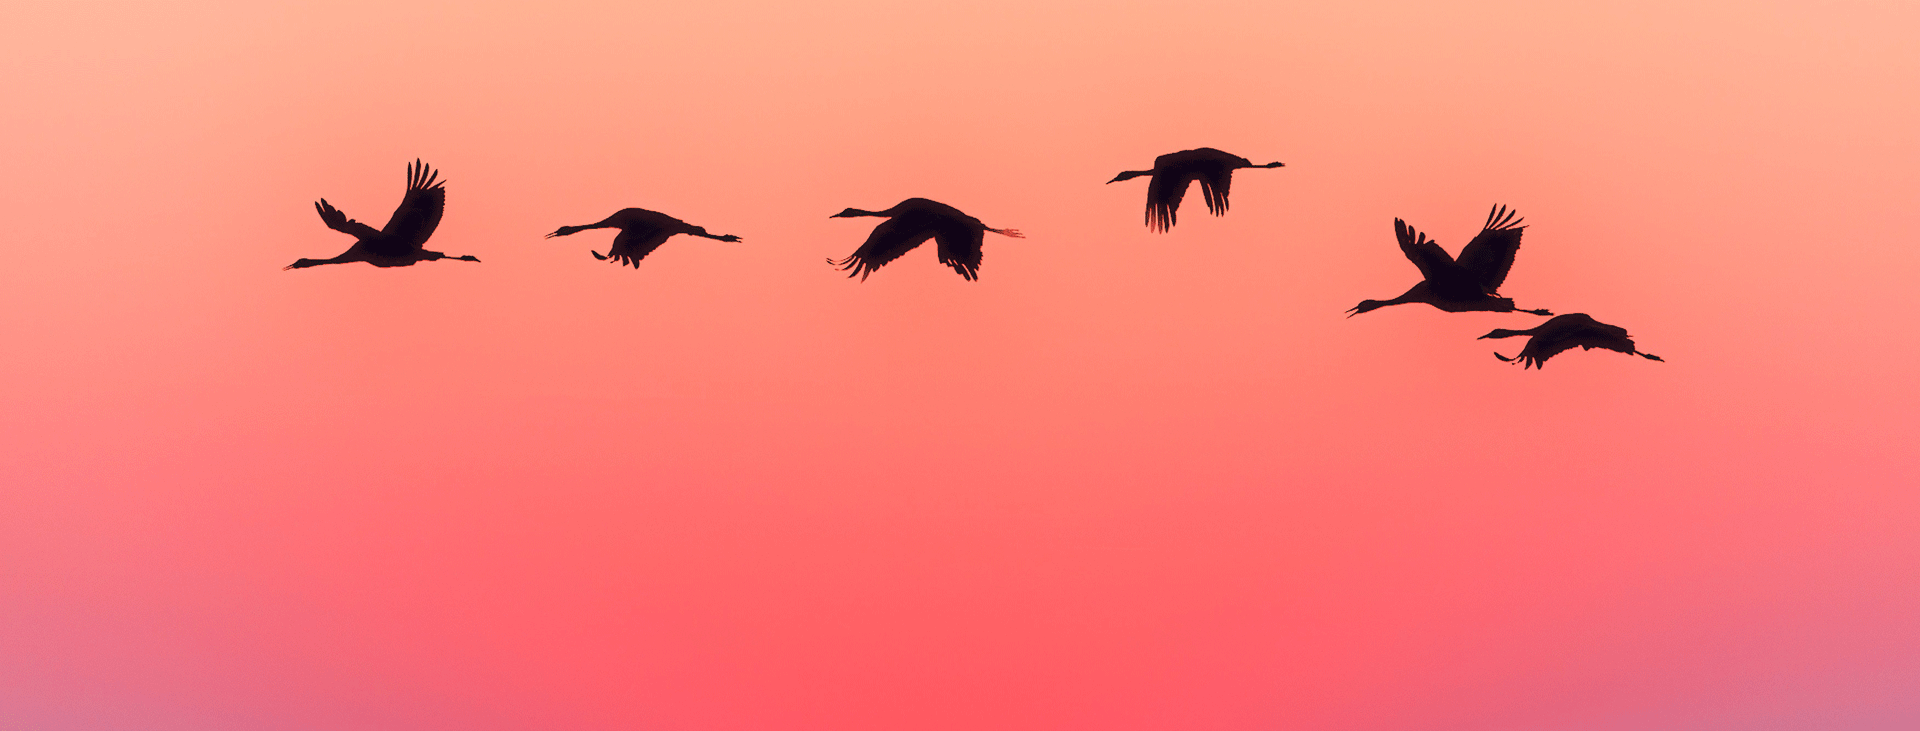 Siloette of geese flying across a red sky